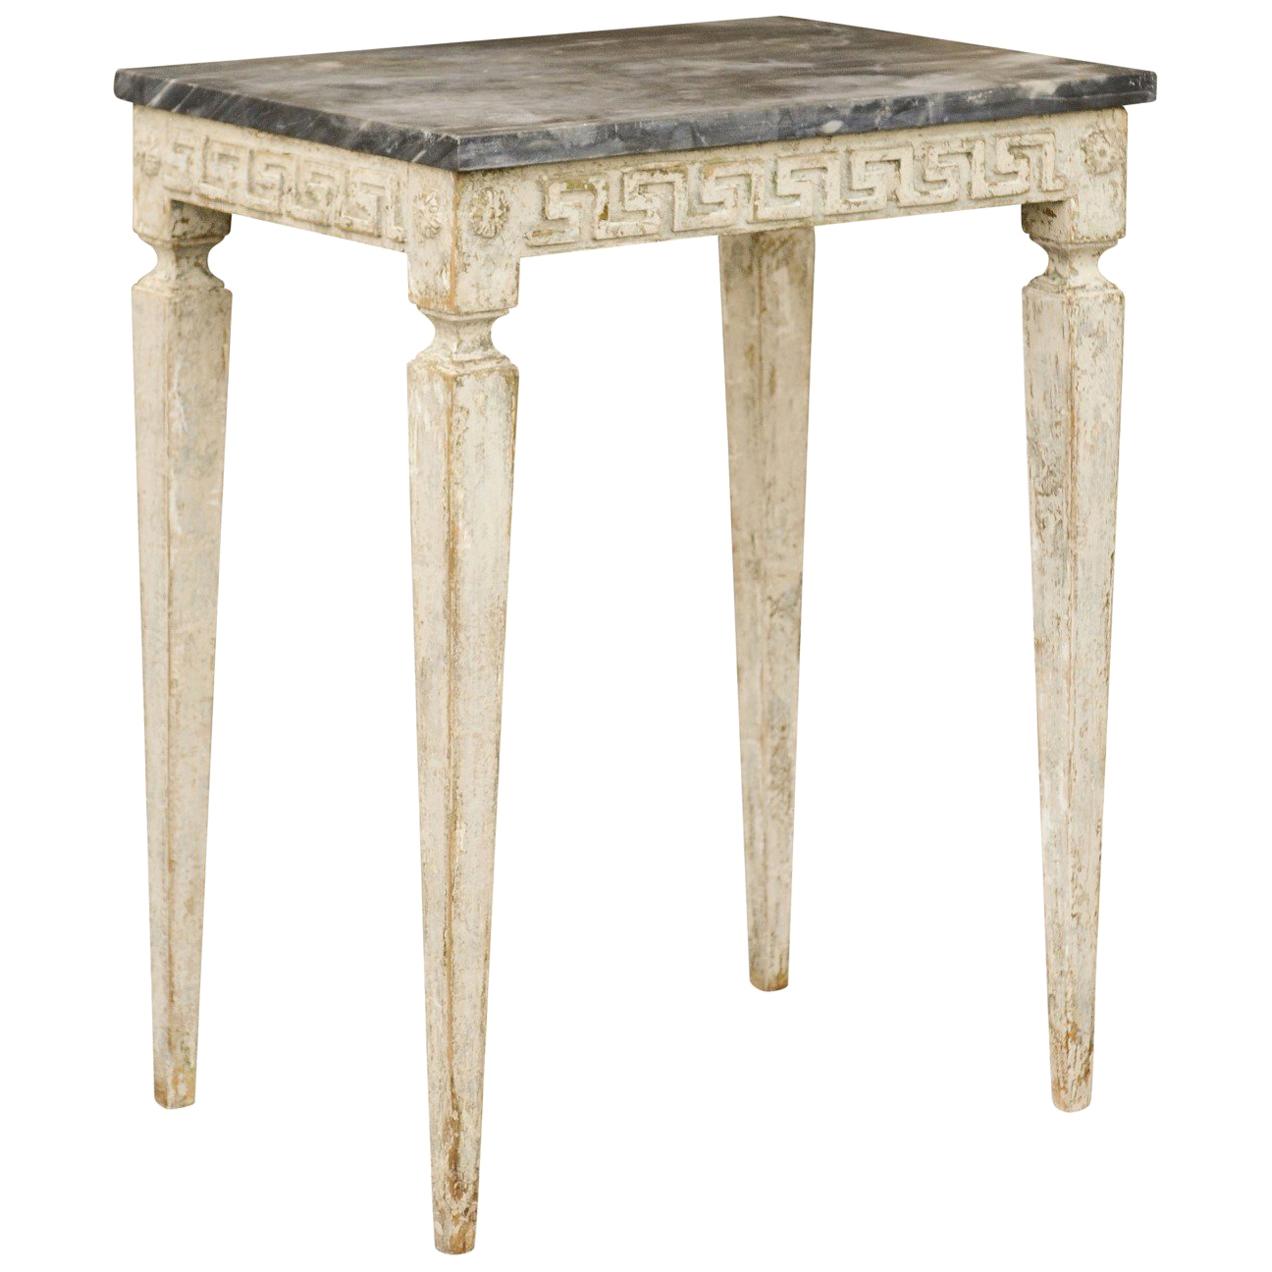 Italian Neoclassical Style Painted Side Table with Dark Marble Top, circa 1920